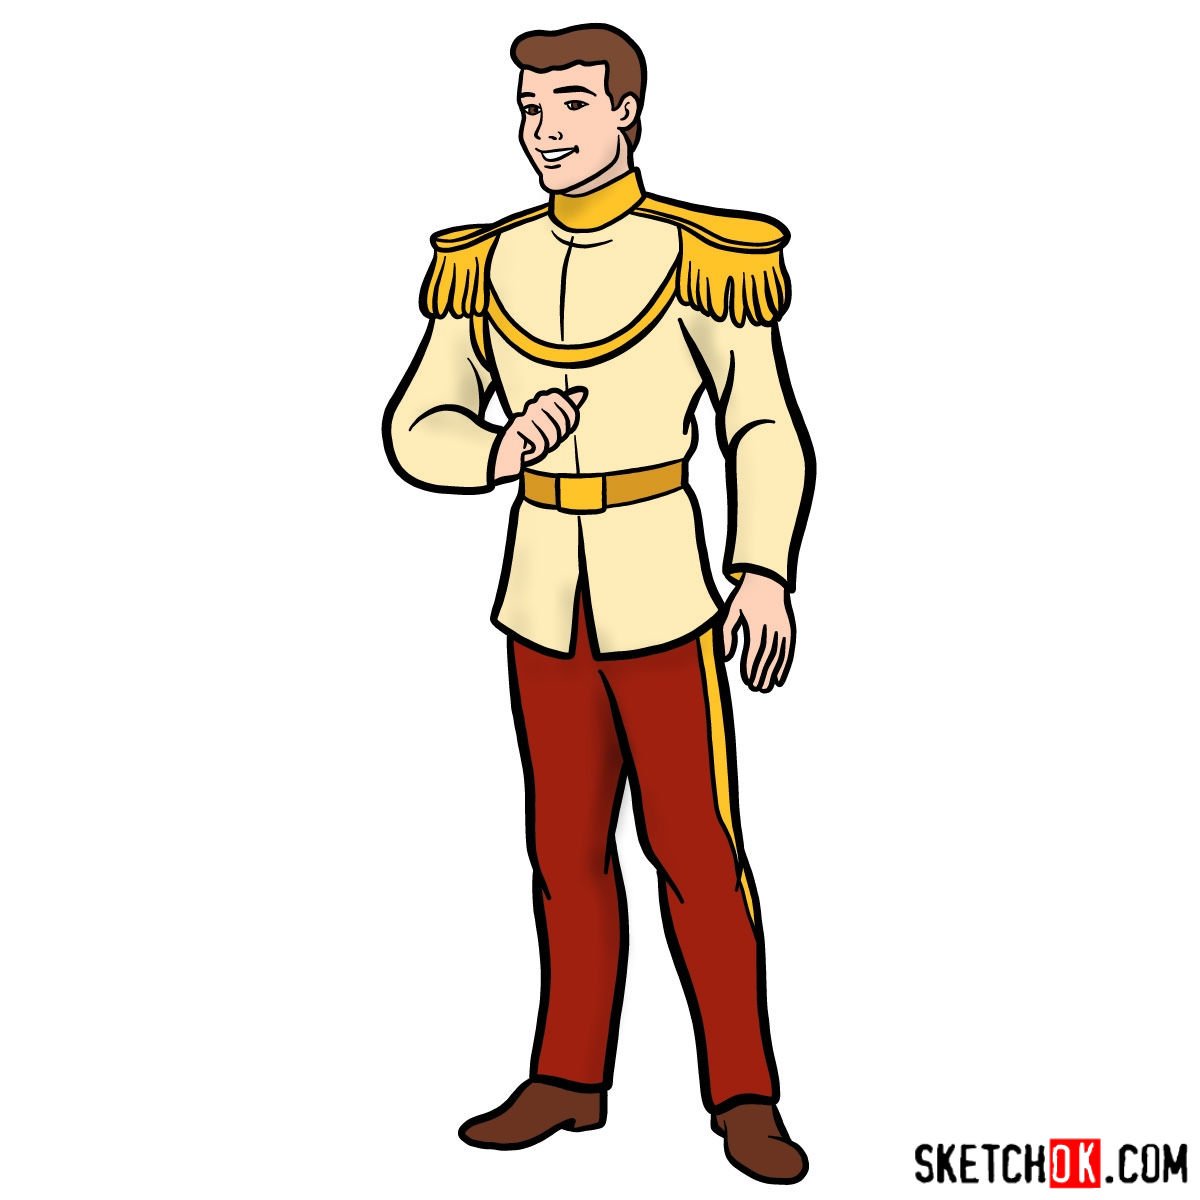 How to draw Prince Charming | Cinderella - Sketchok easy drawing guides